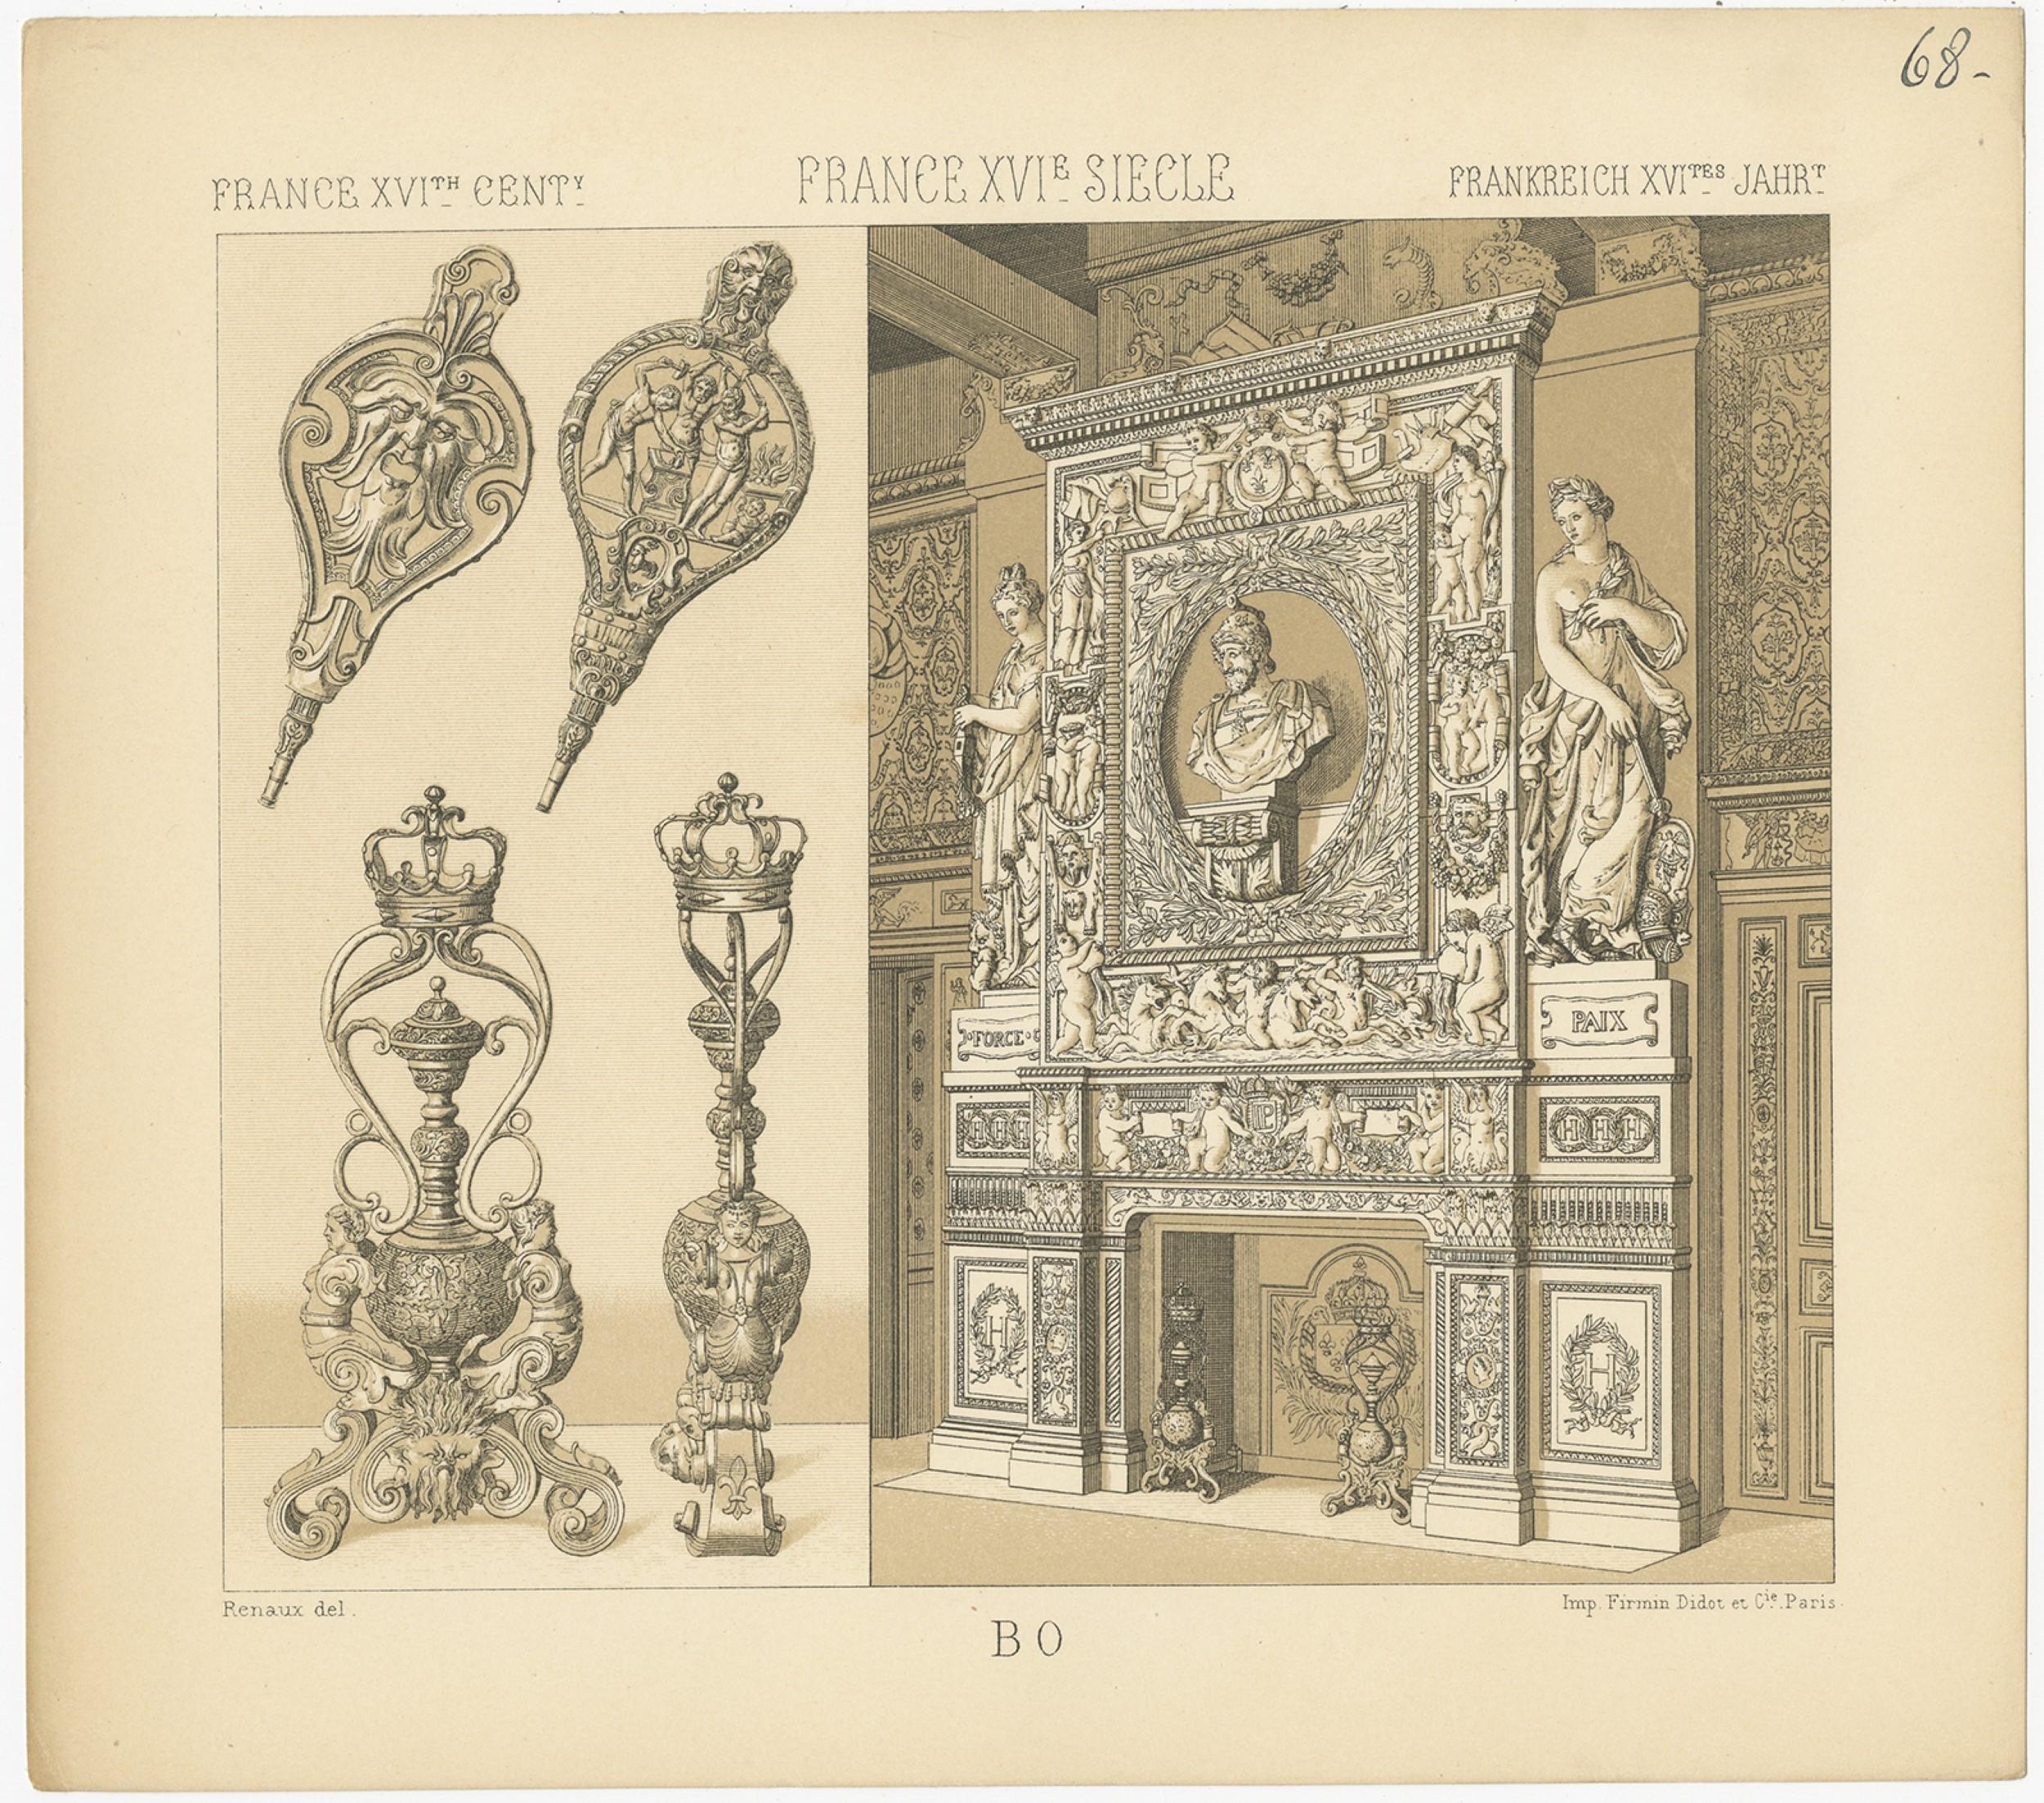 Antique print titled 'France XVIth Cent - France XVIe Siecle - Frankreich XVItes Jahr'. Chromolithograph of French decorative objects. This print originates from 'Le Costume Historique' by M.A. Racinet. Published circa 1880.